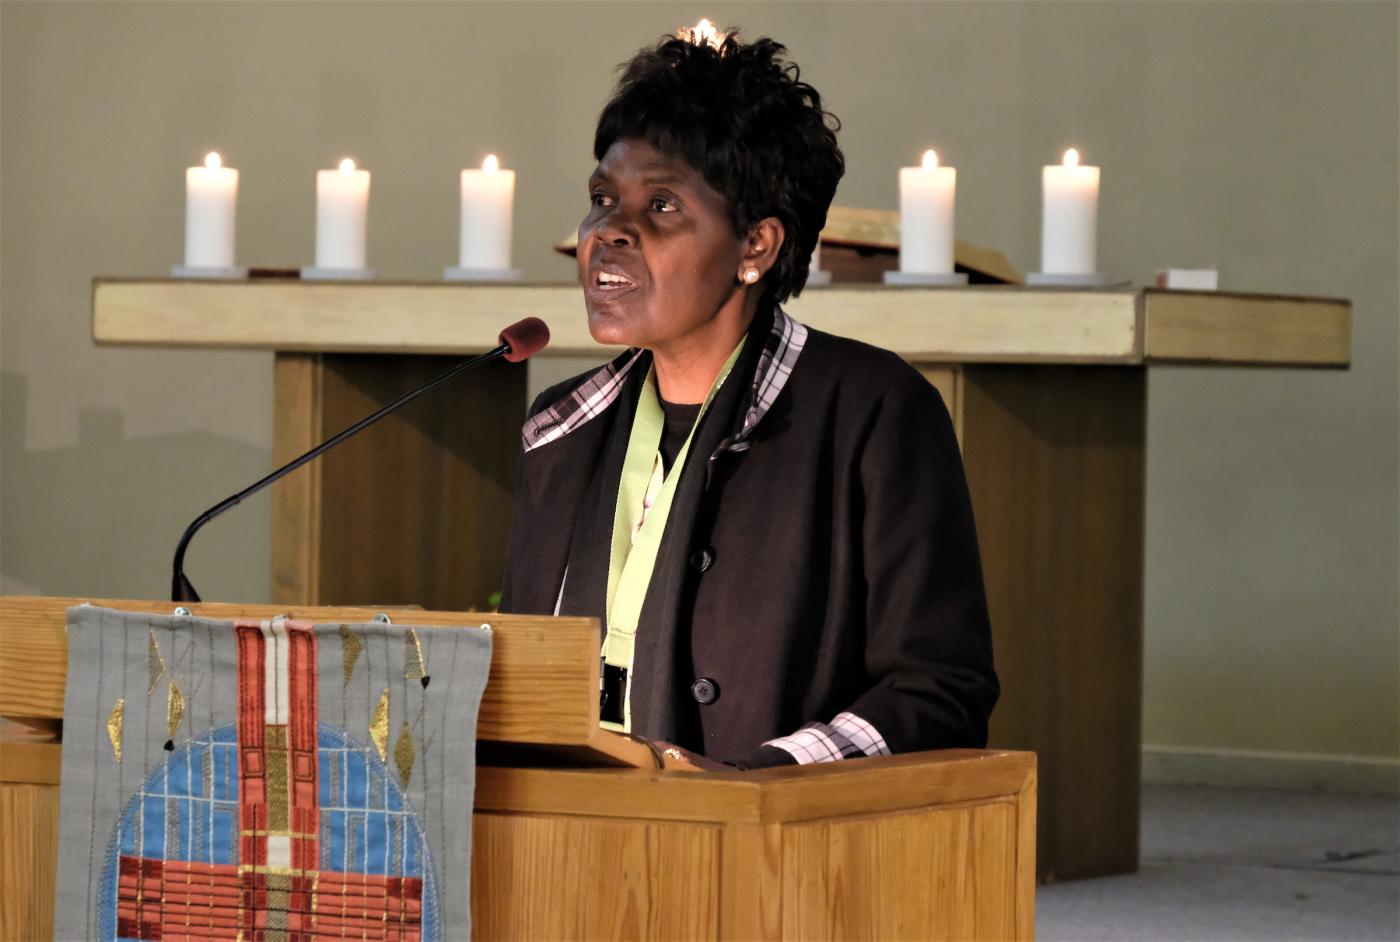 Dr Agnes Abuom, moderator of the WCC Central Committee at the Ecumenical Weekend in Uppsala on 3-4 November 2018. Photo: Mikael Stjernberg/Christian Council of Sweden